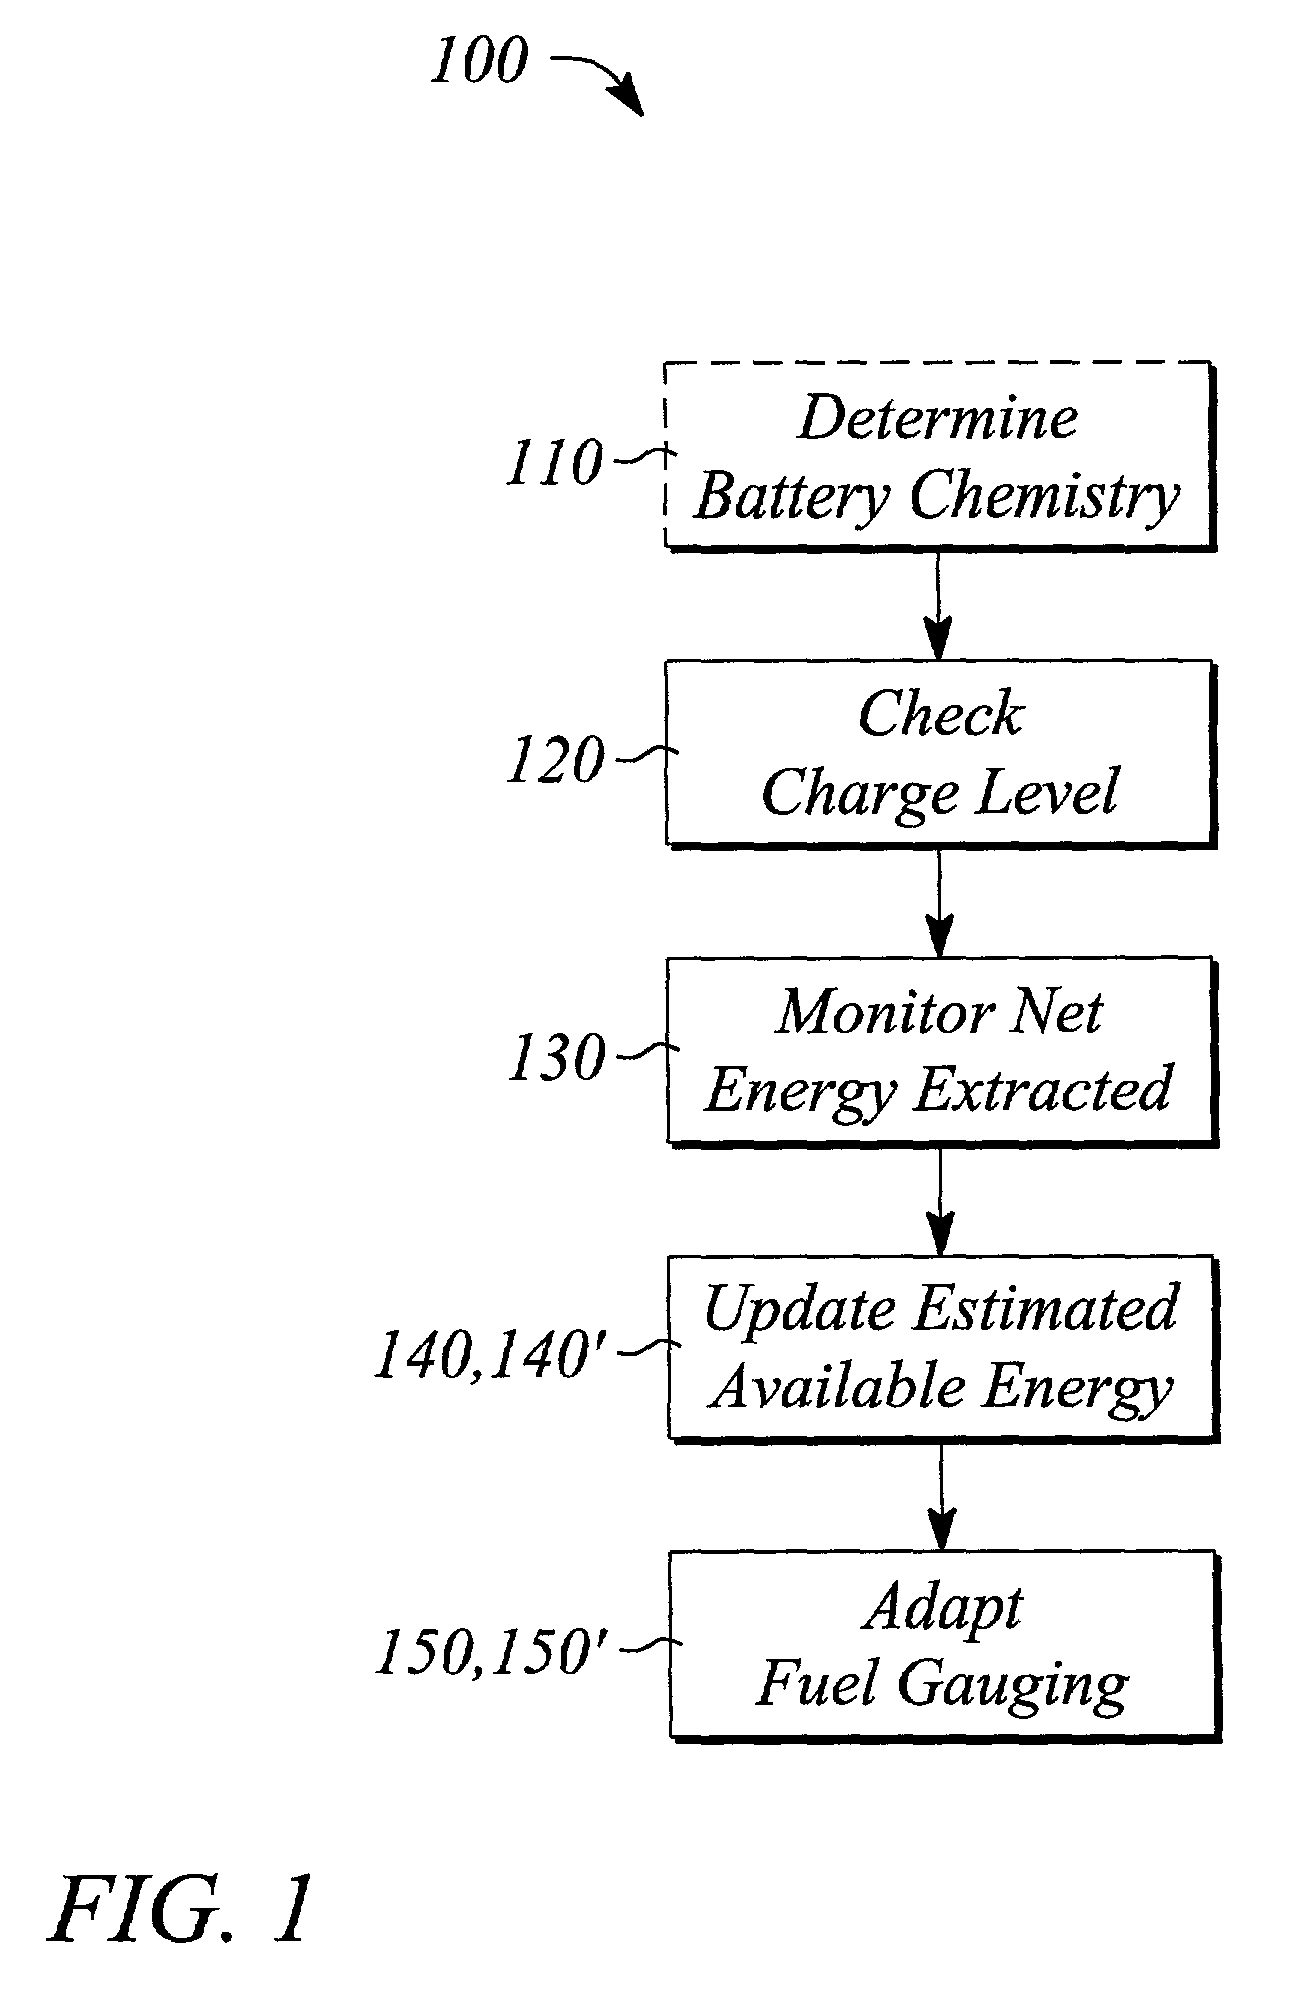 Use-adaptive fuel gauging for battery powered electronic devices